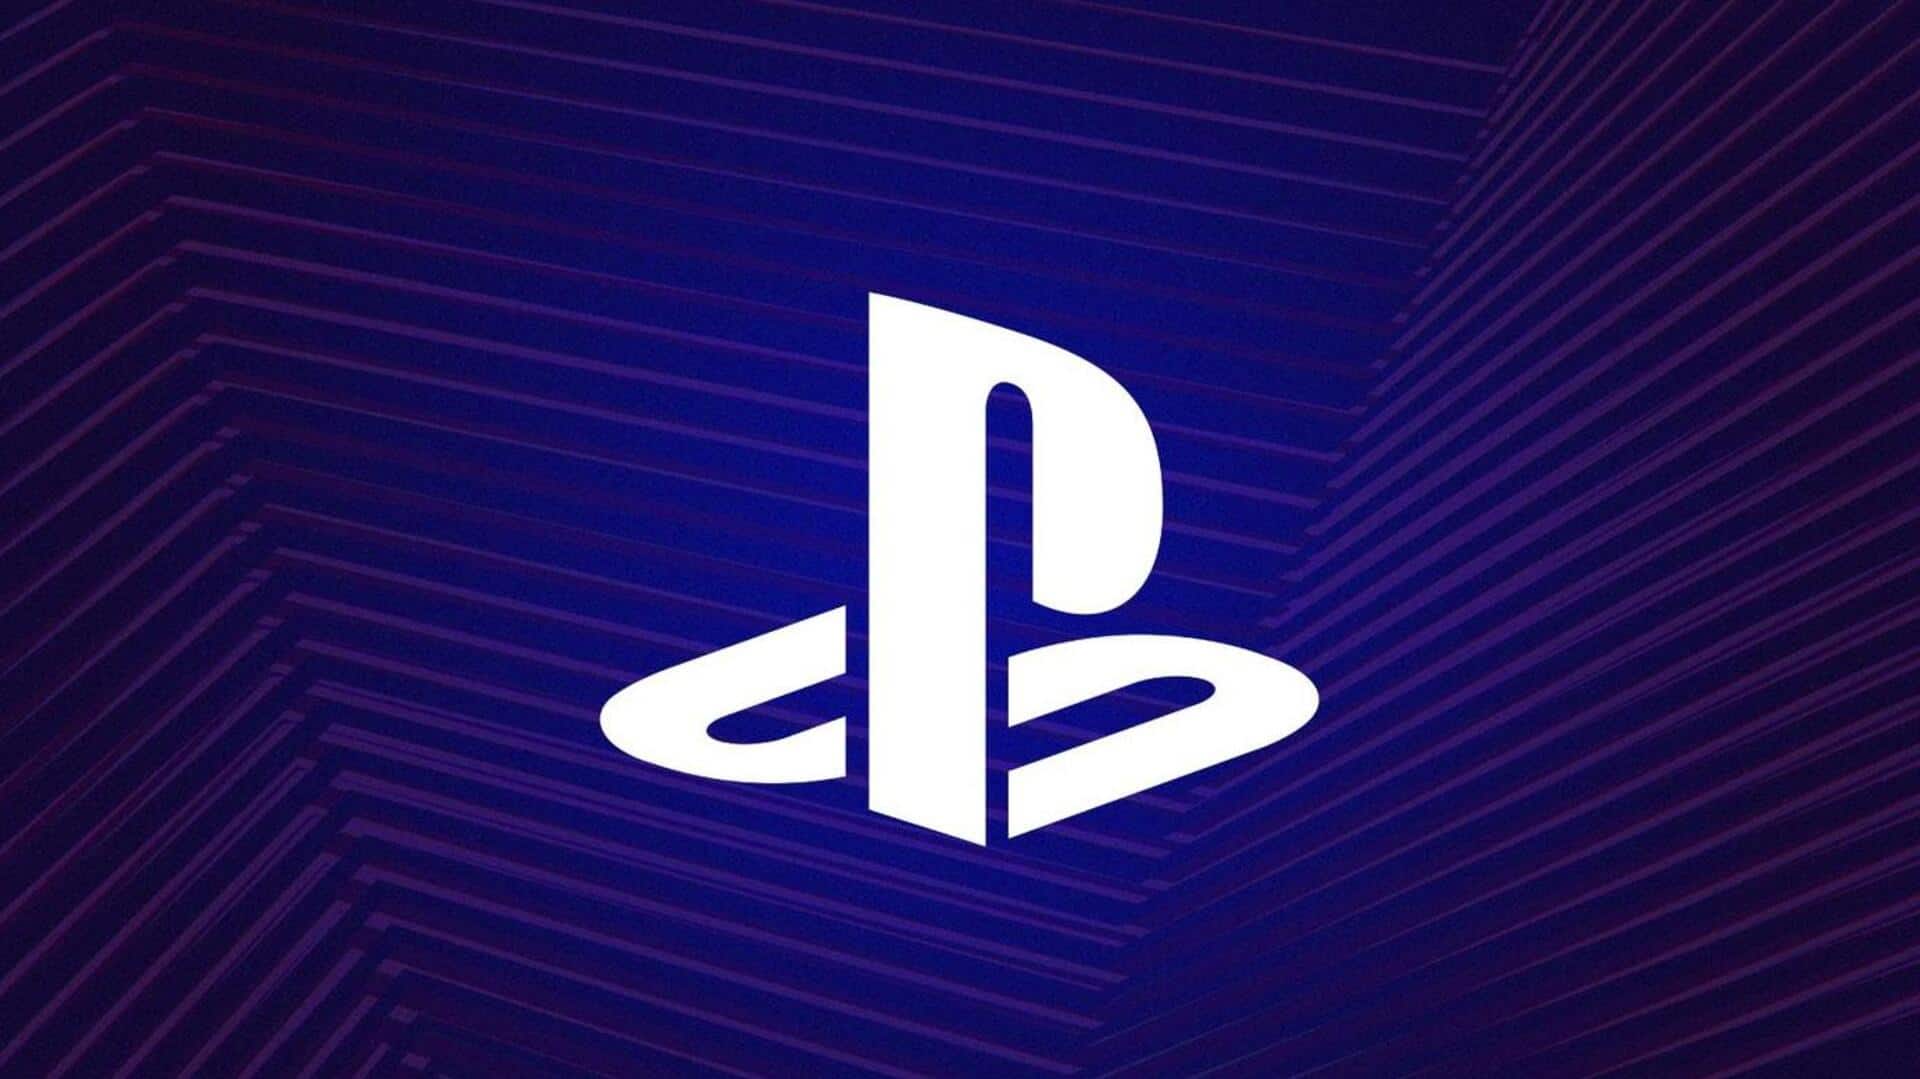 Several PlayStation accounts hit by unexpected suspensions